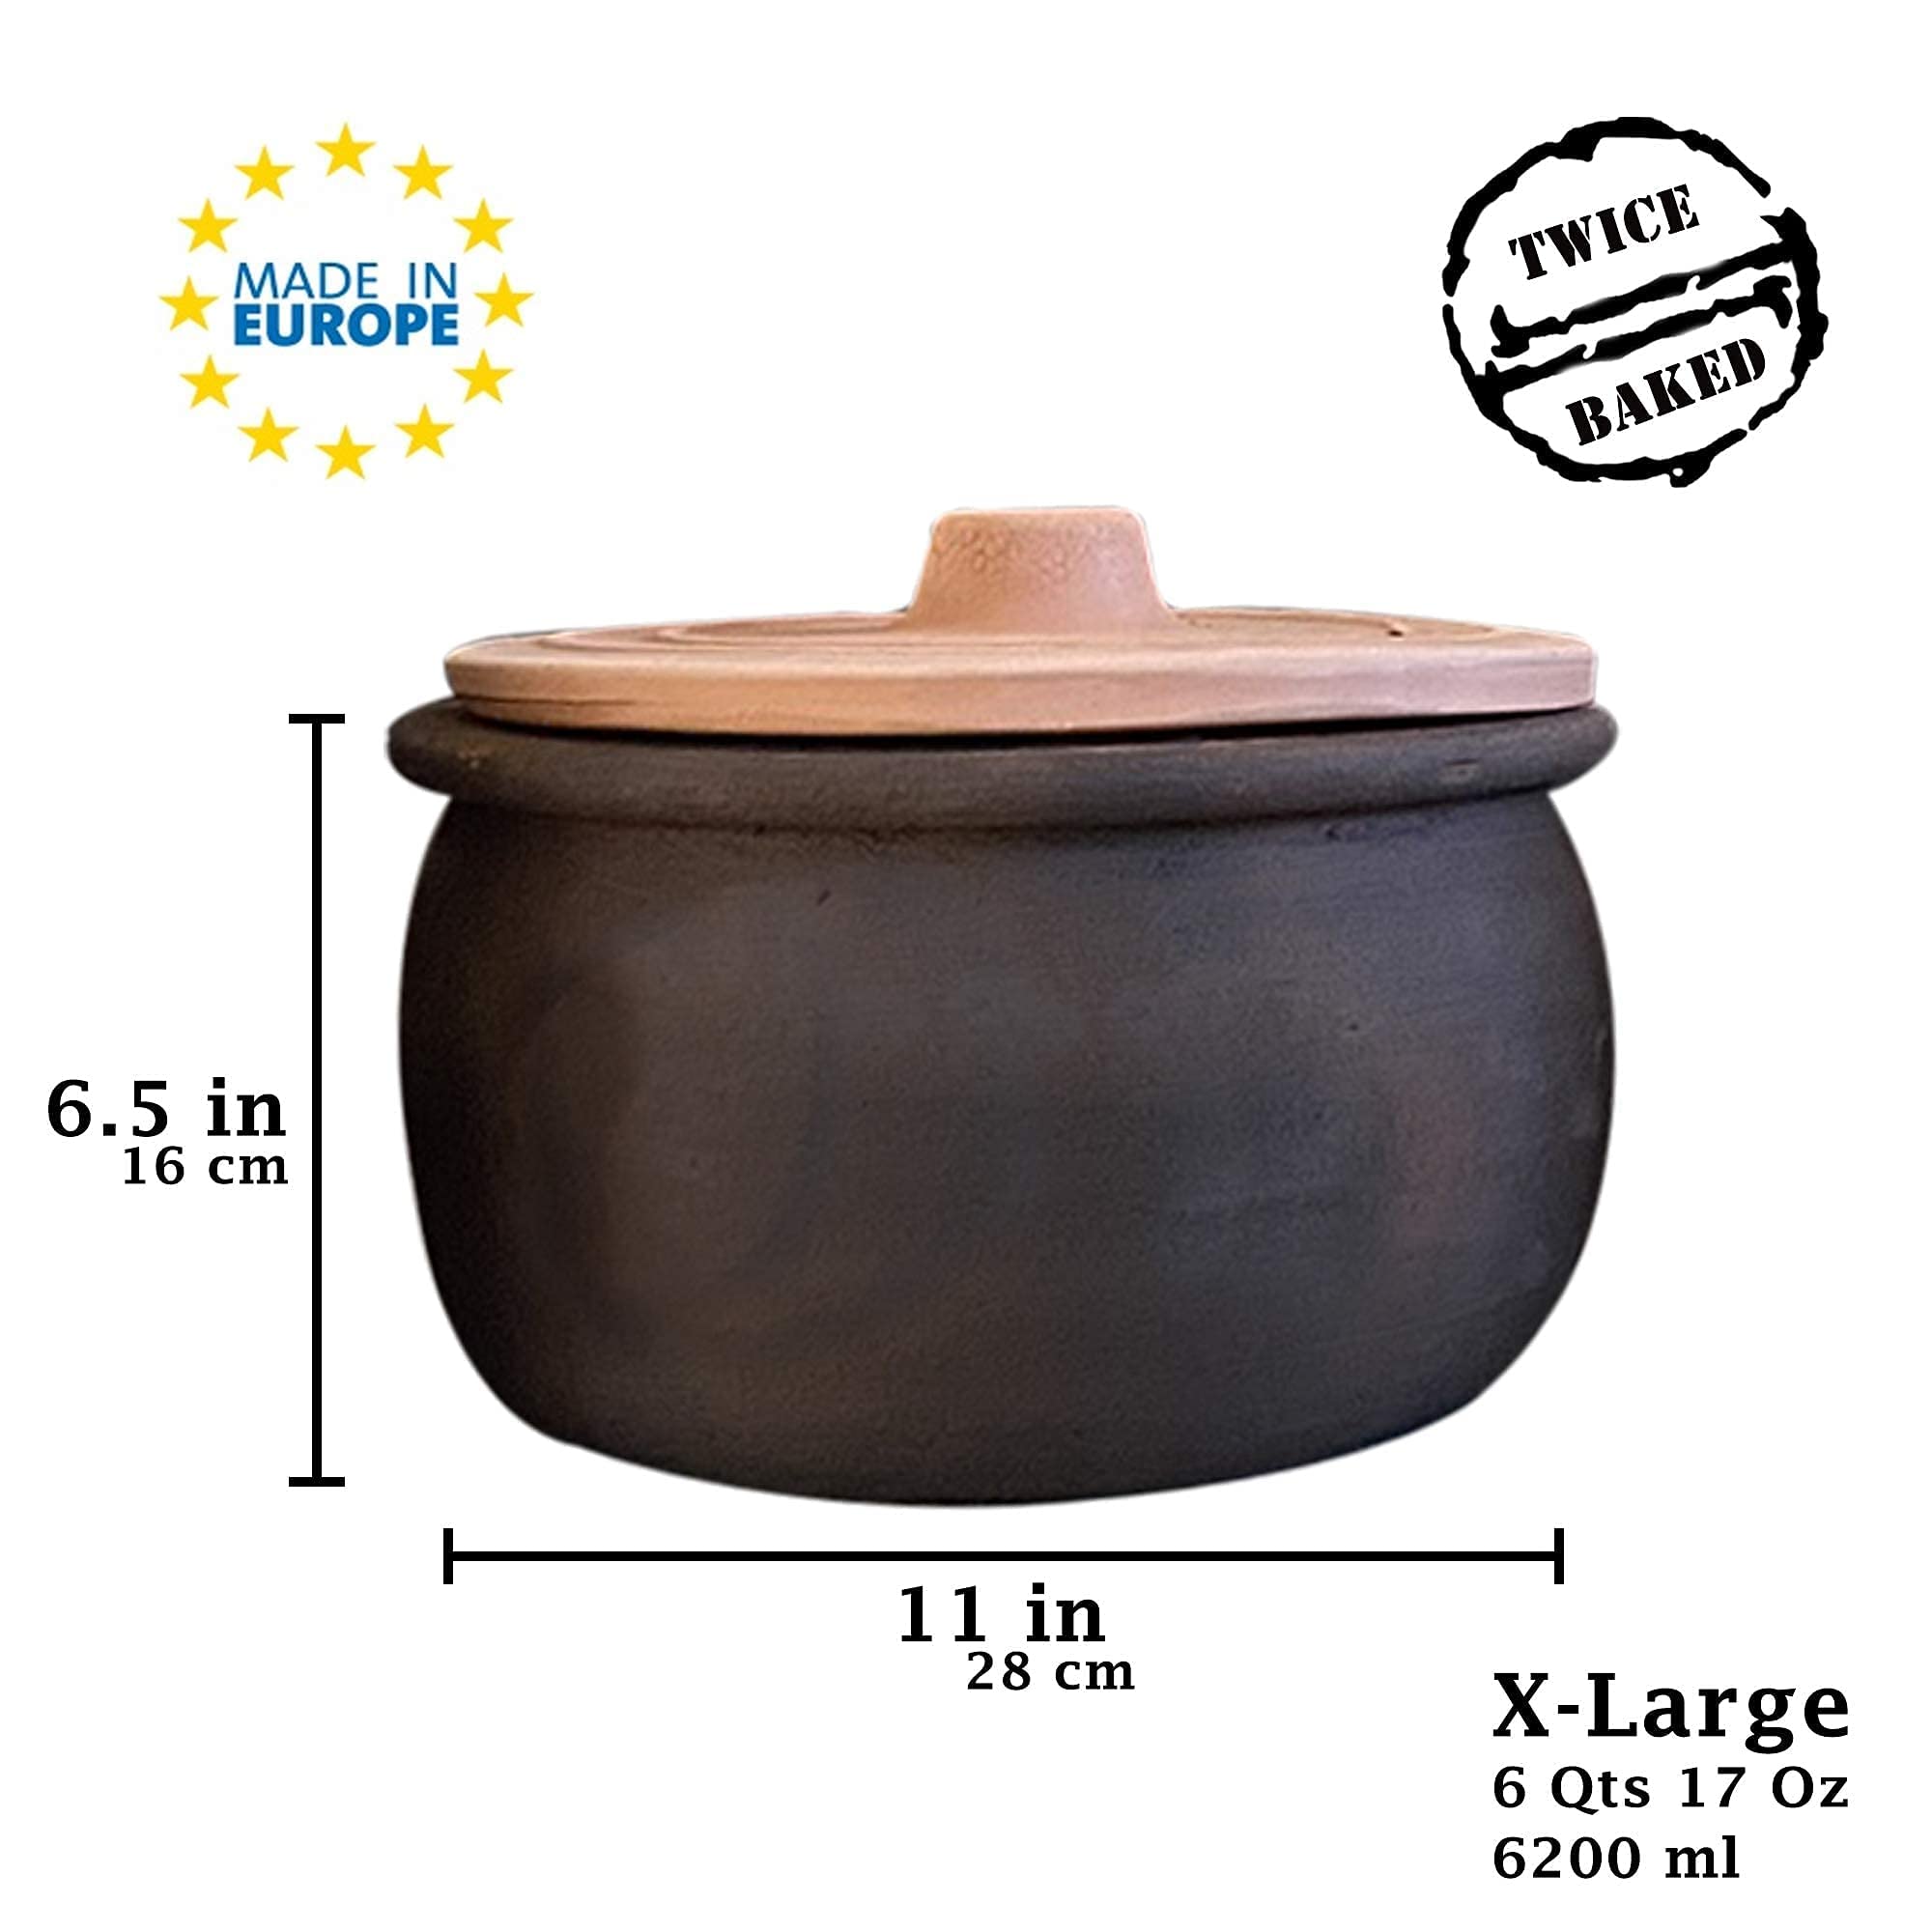 Clay Cooking Pots with Lids, Clay Pots for Cooking, UNGLAZED Earthenware Rice Pots, Twice Baked Traditional Casserole for Cooking on STOVE Top, Vintage Portuguese Terracotta Roaster (Extra Large)